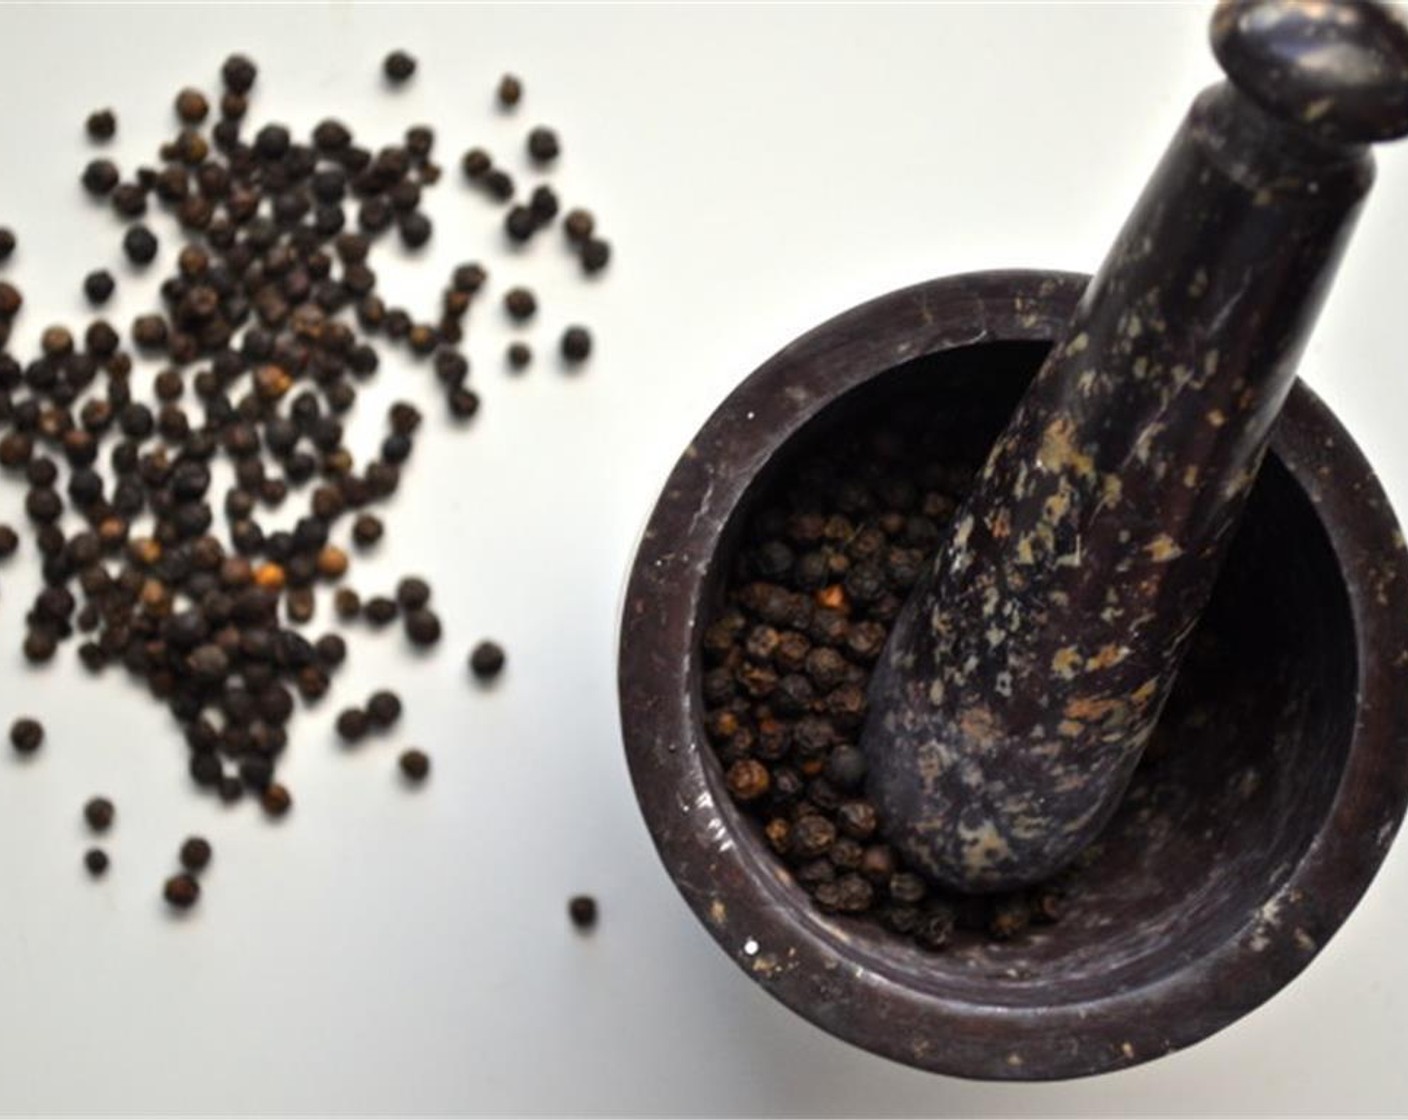 step 1 Crush the Black Peppercorns (2 Tbsp) using a mortar and pestle or spiced grinder.